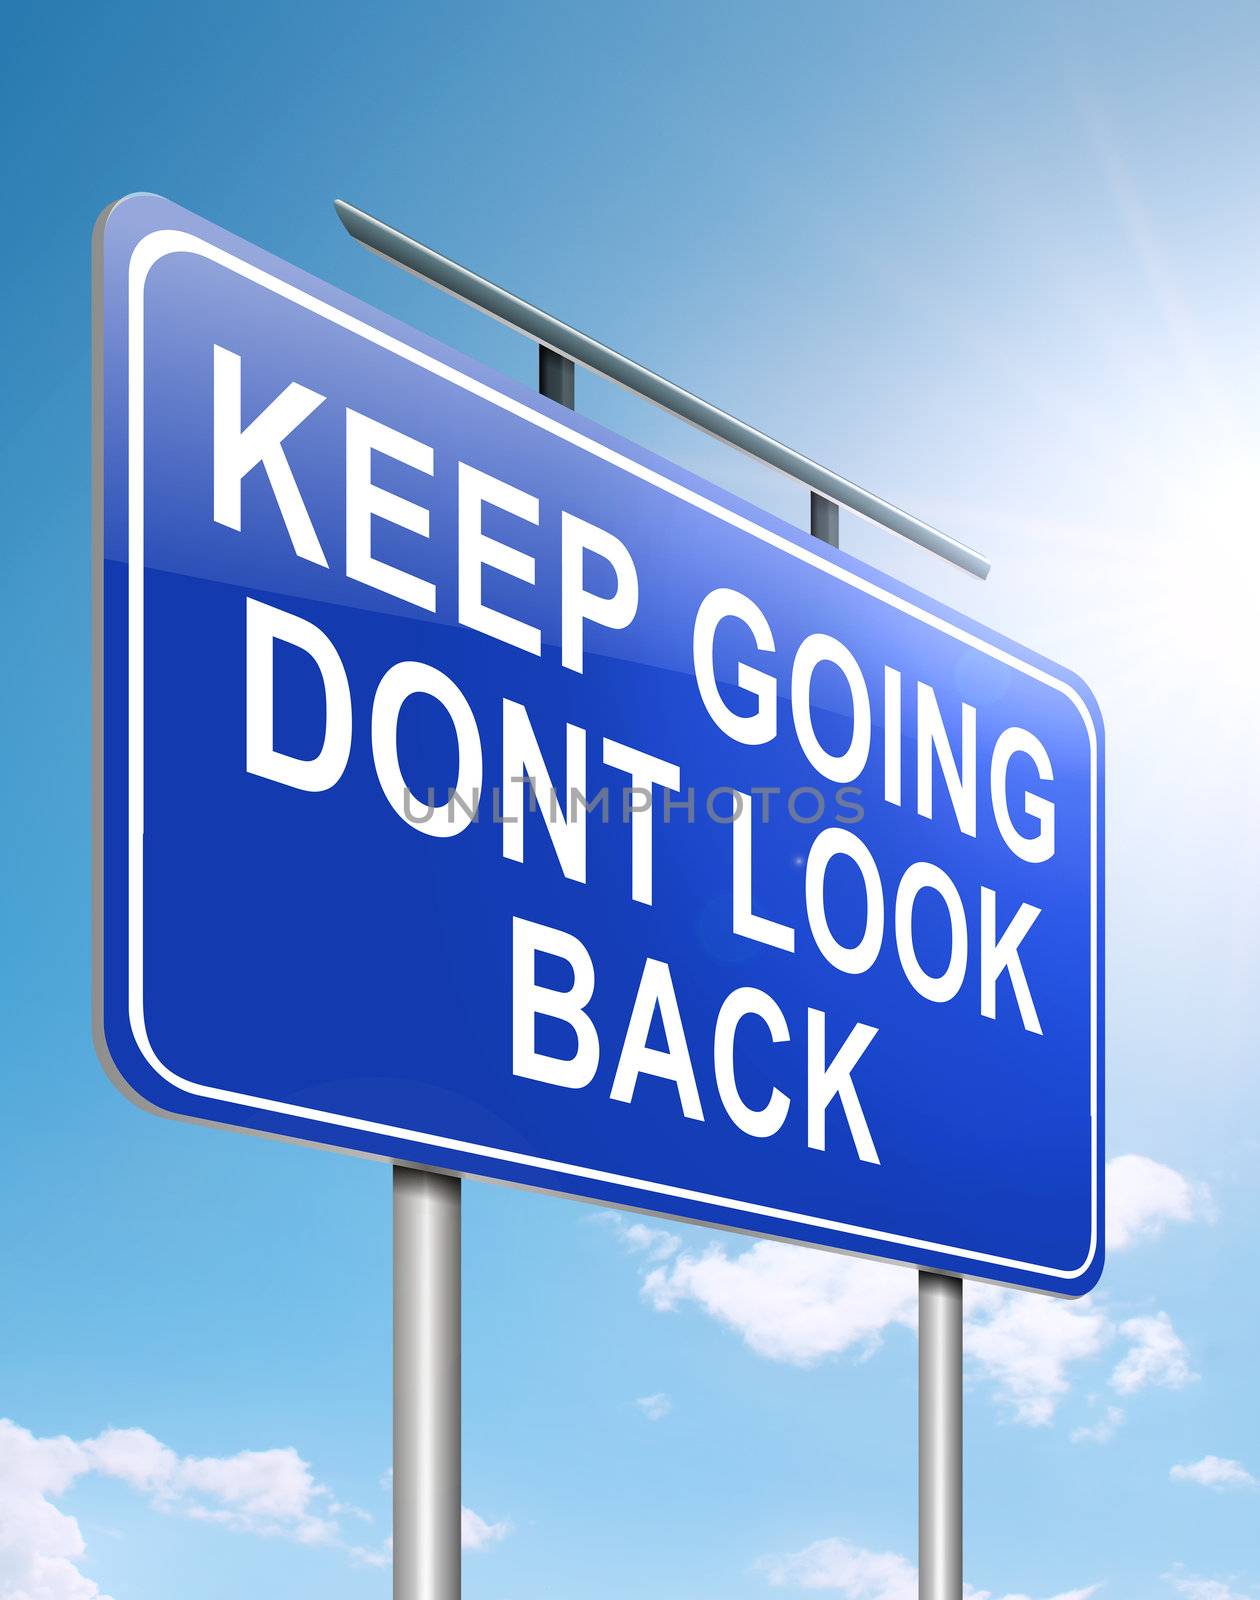 Illustration depicting a roadsign with a motivational concept. Blue sky background.